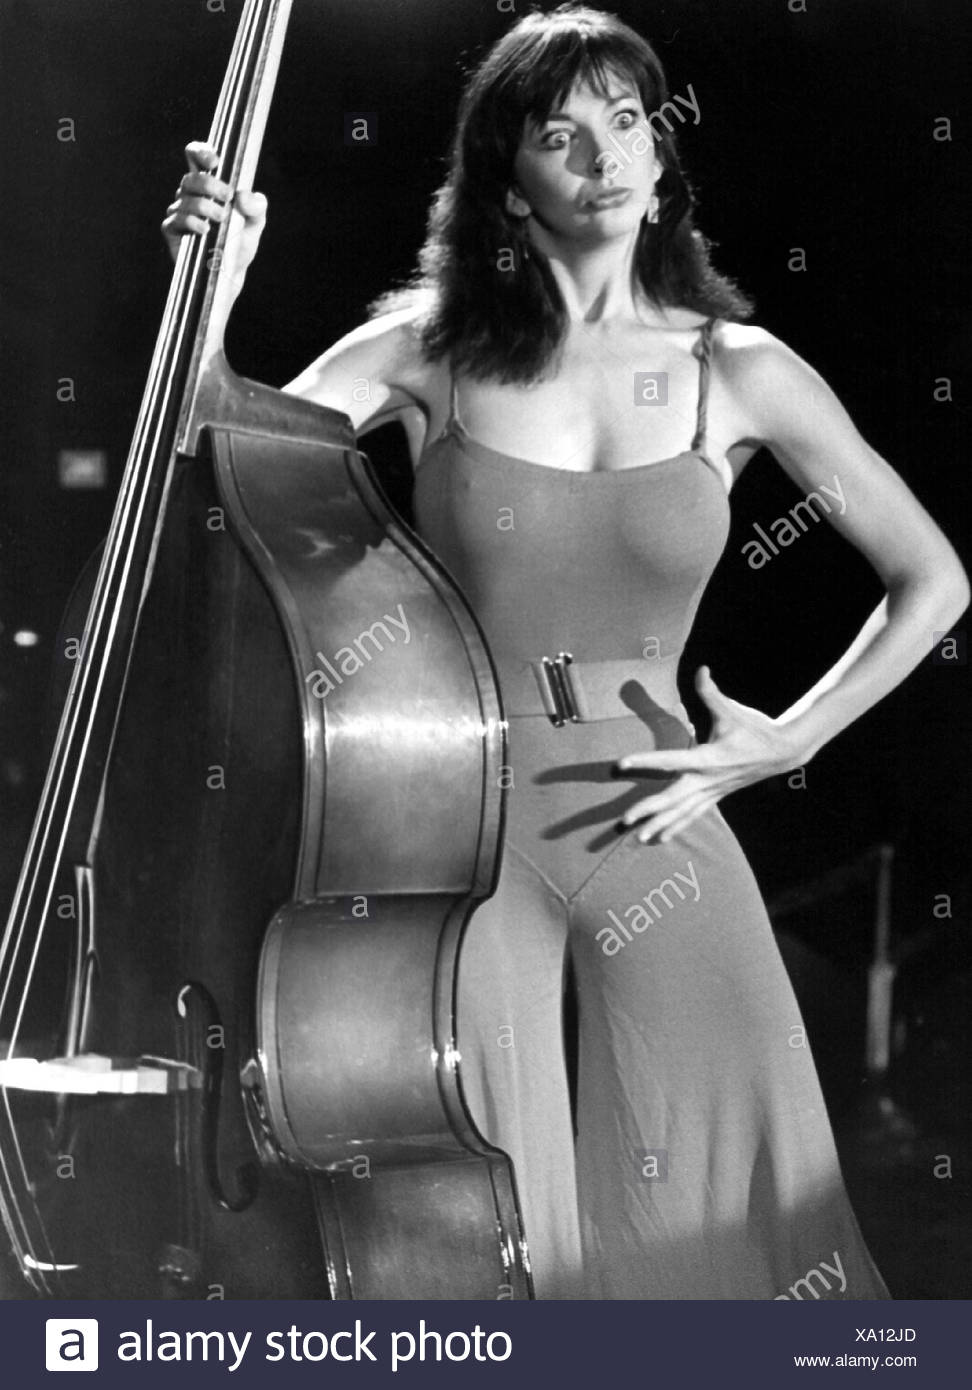 Kate Bush High Resolution Stock Photography And Images Alamy Babooshka by kate bush performed live by them heavy people at the river. https www alamy com bush kate 3071958 british musician half length during a show image281536485 html